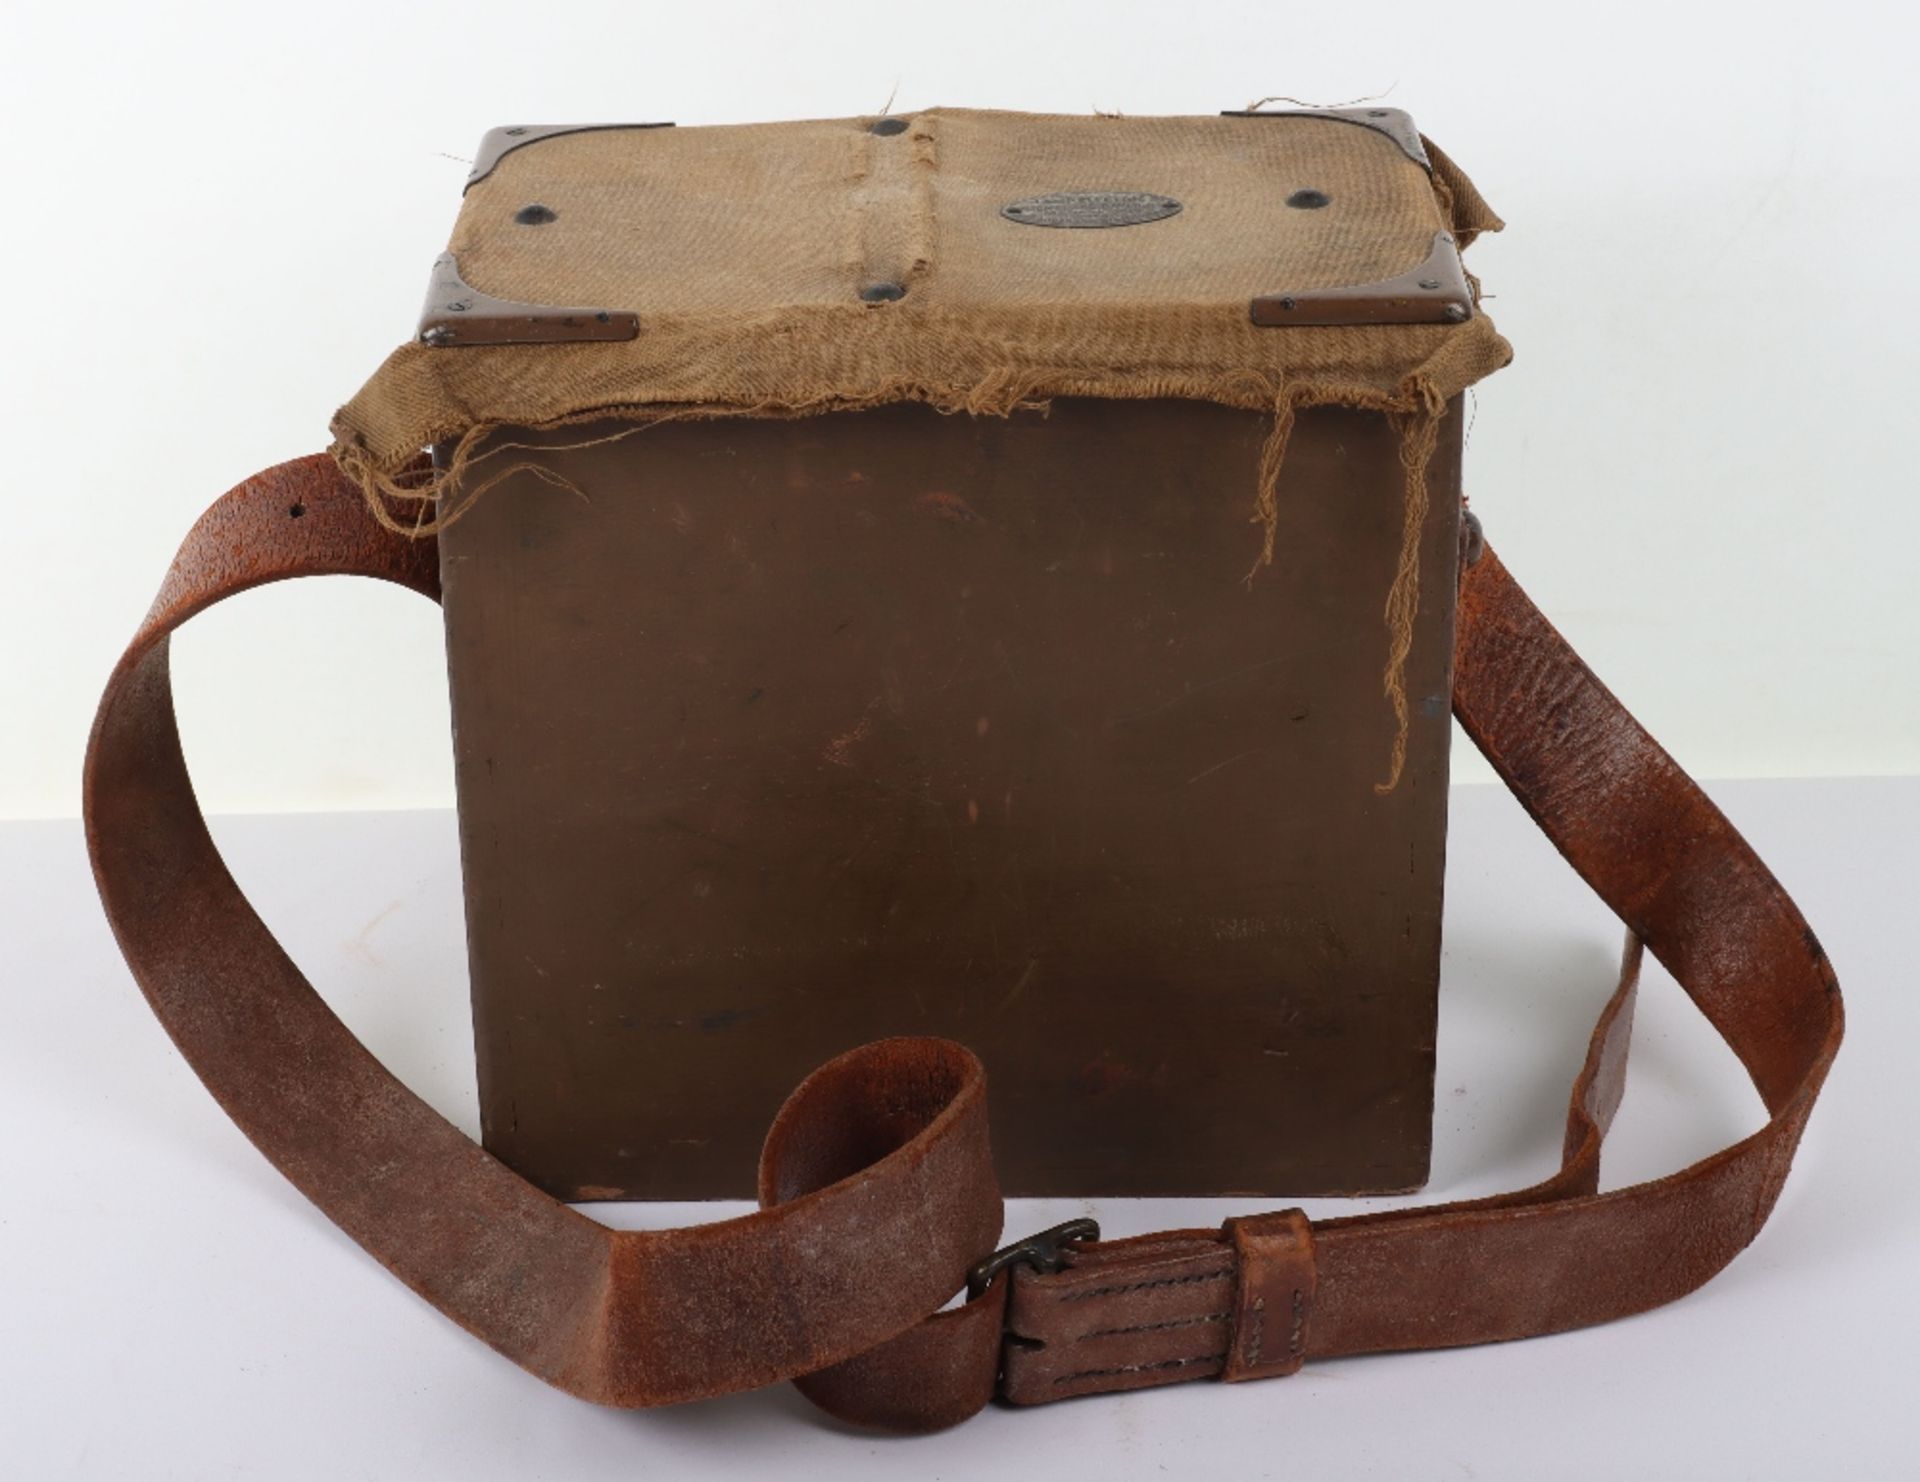 WW1 British 1918 Signalling Lamp in Carry Case - Image 6 of 7